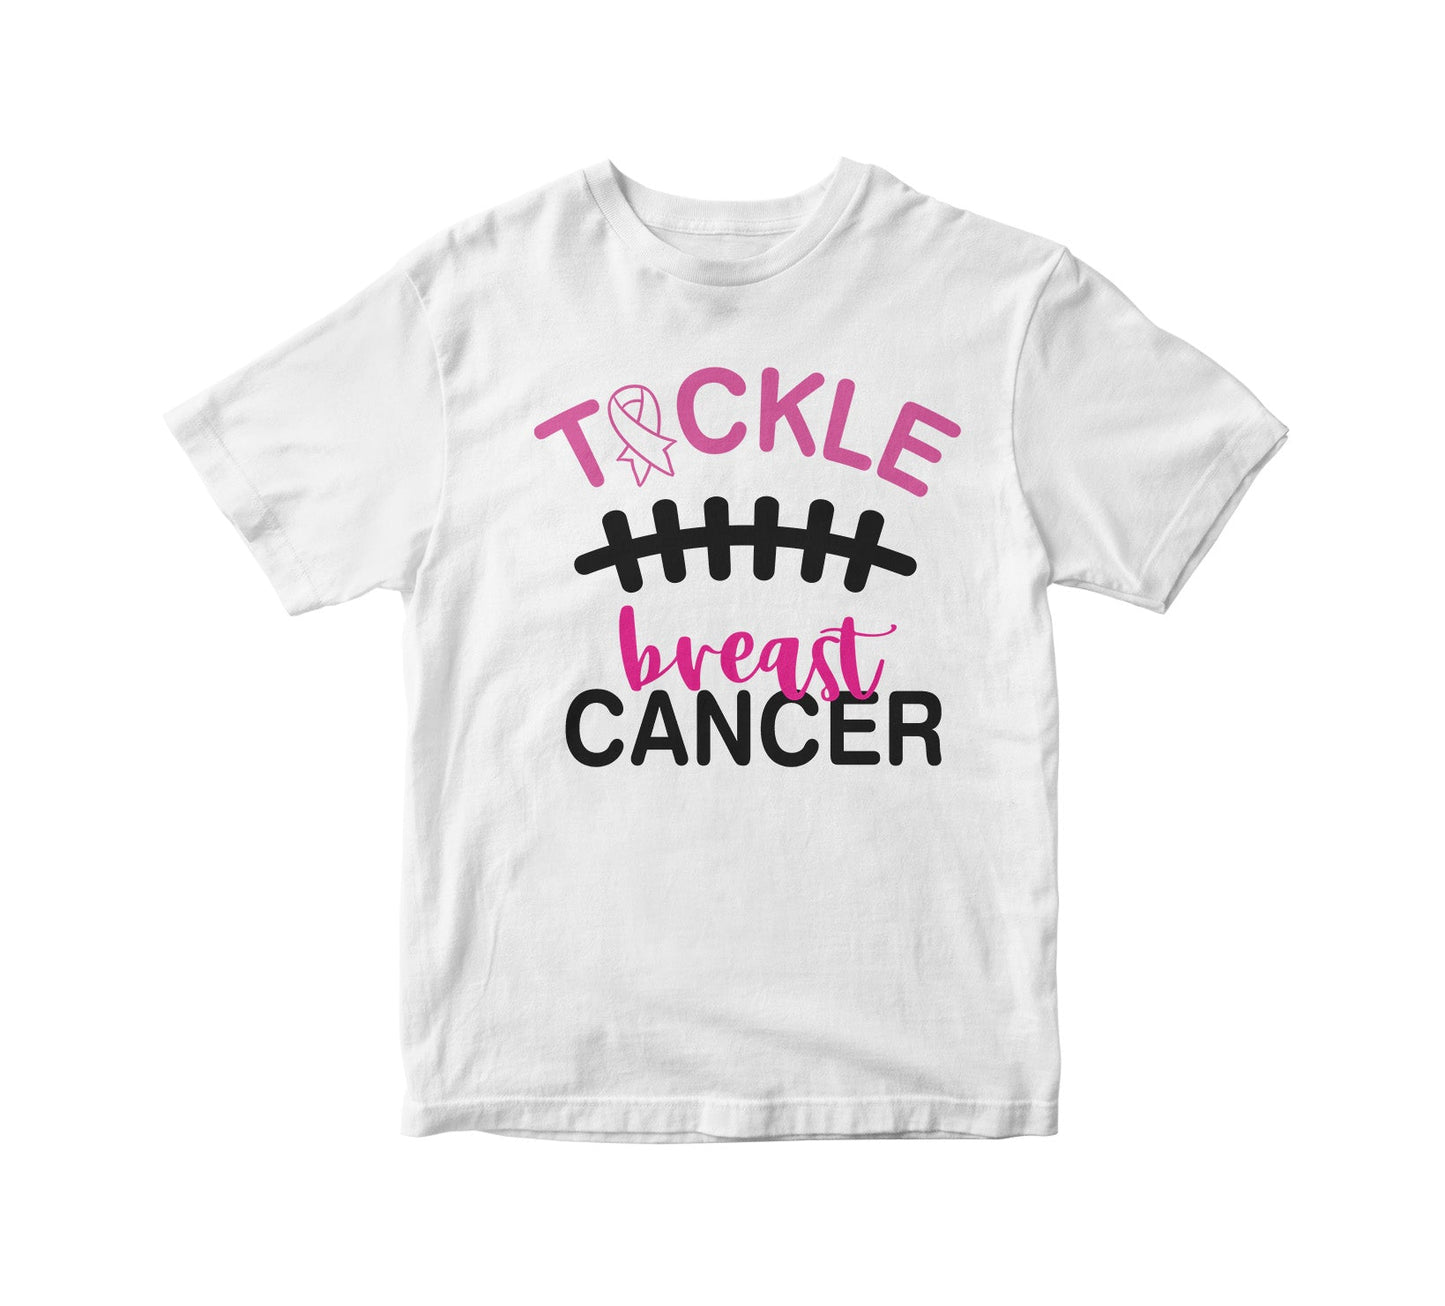 Tackle Breast Cancer  Kids Unisex T-Shirt